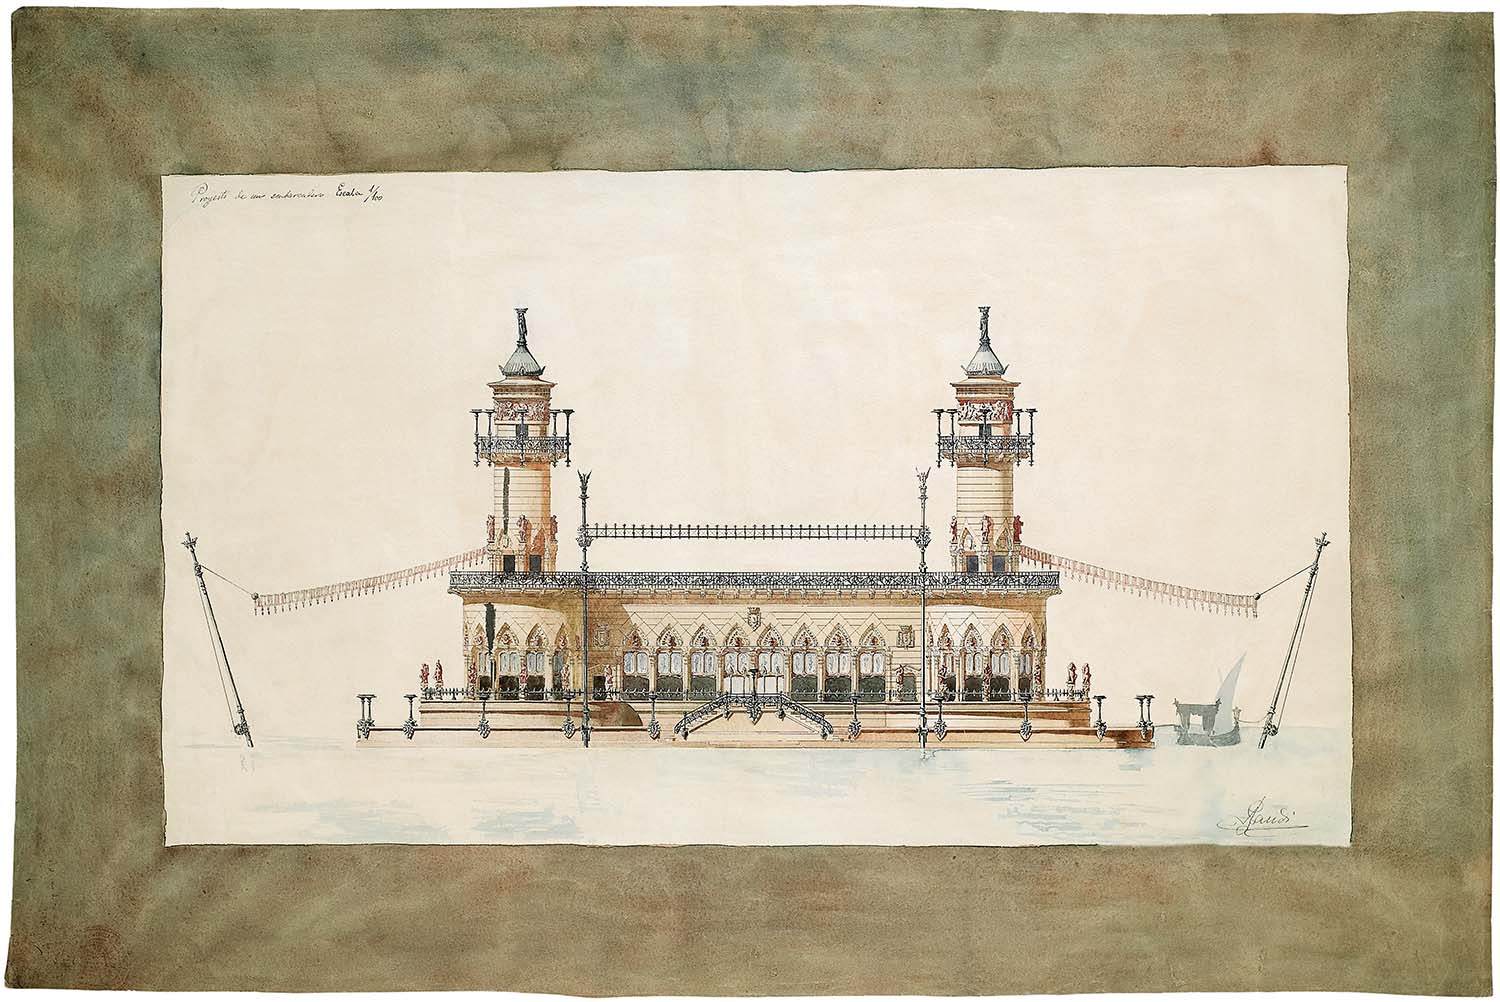 Embarkation Pier, 1876. As a student, Gaudí